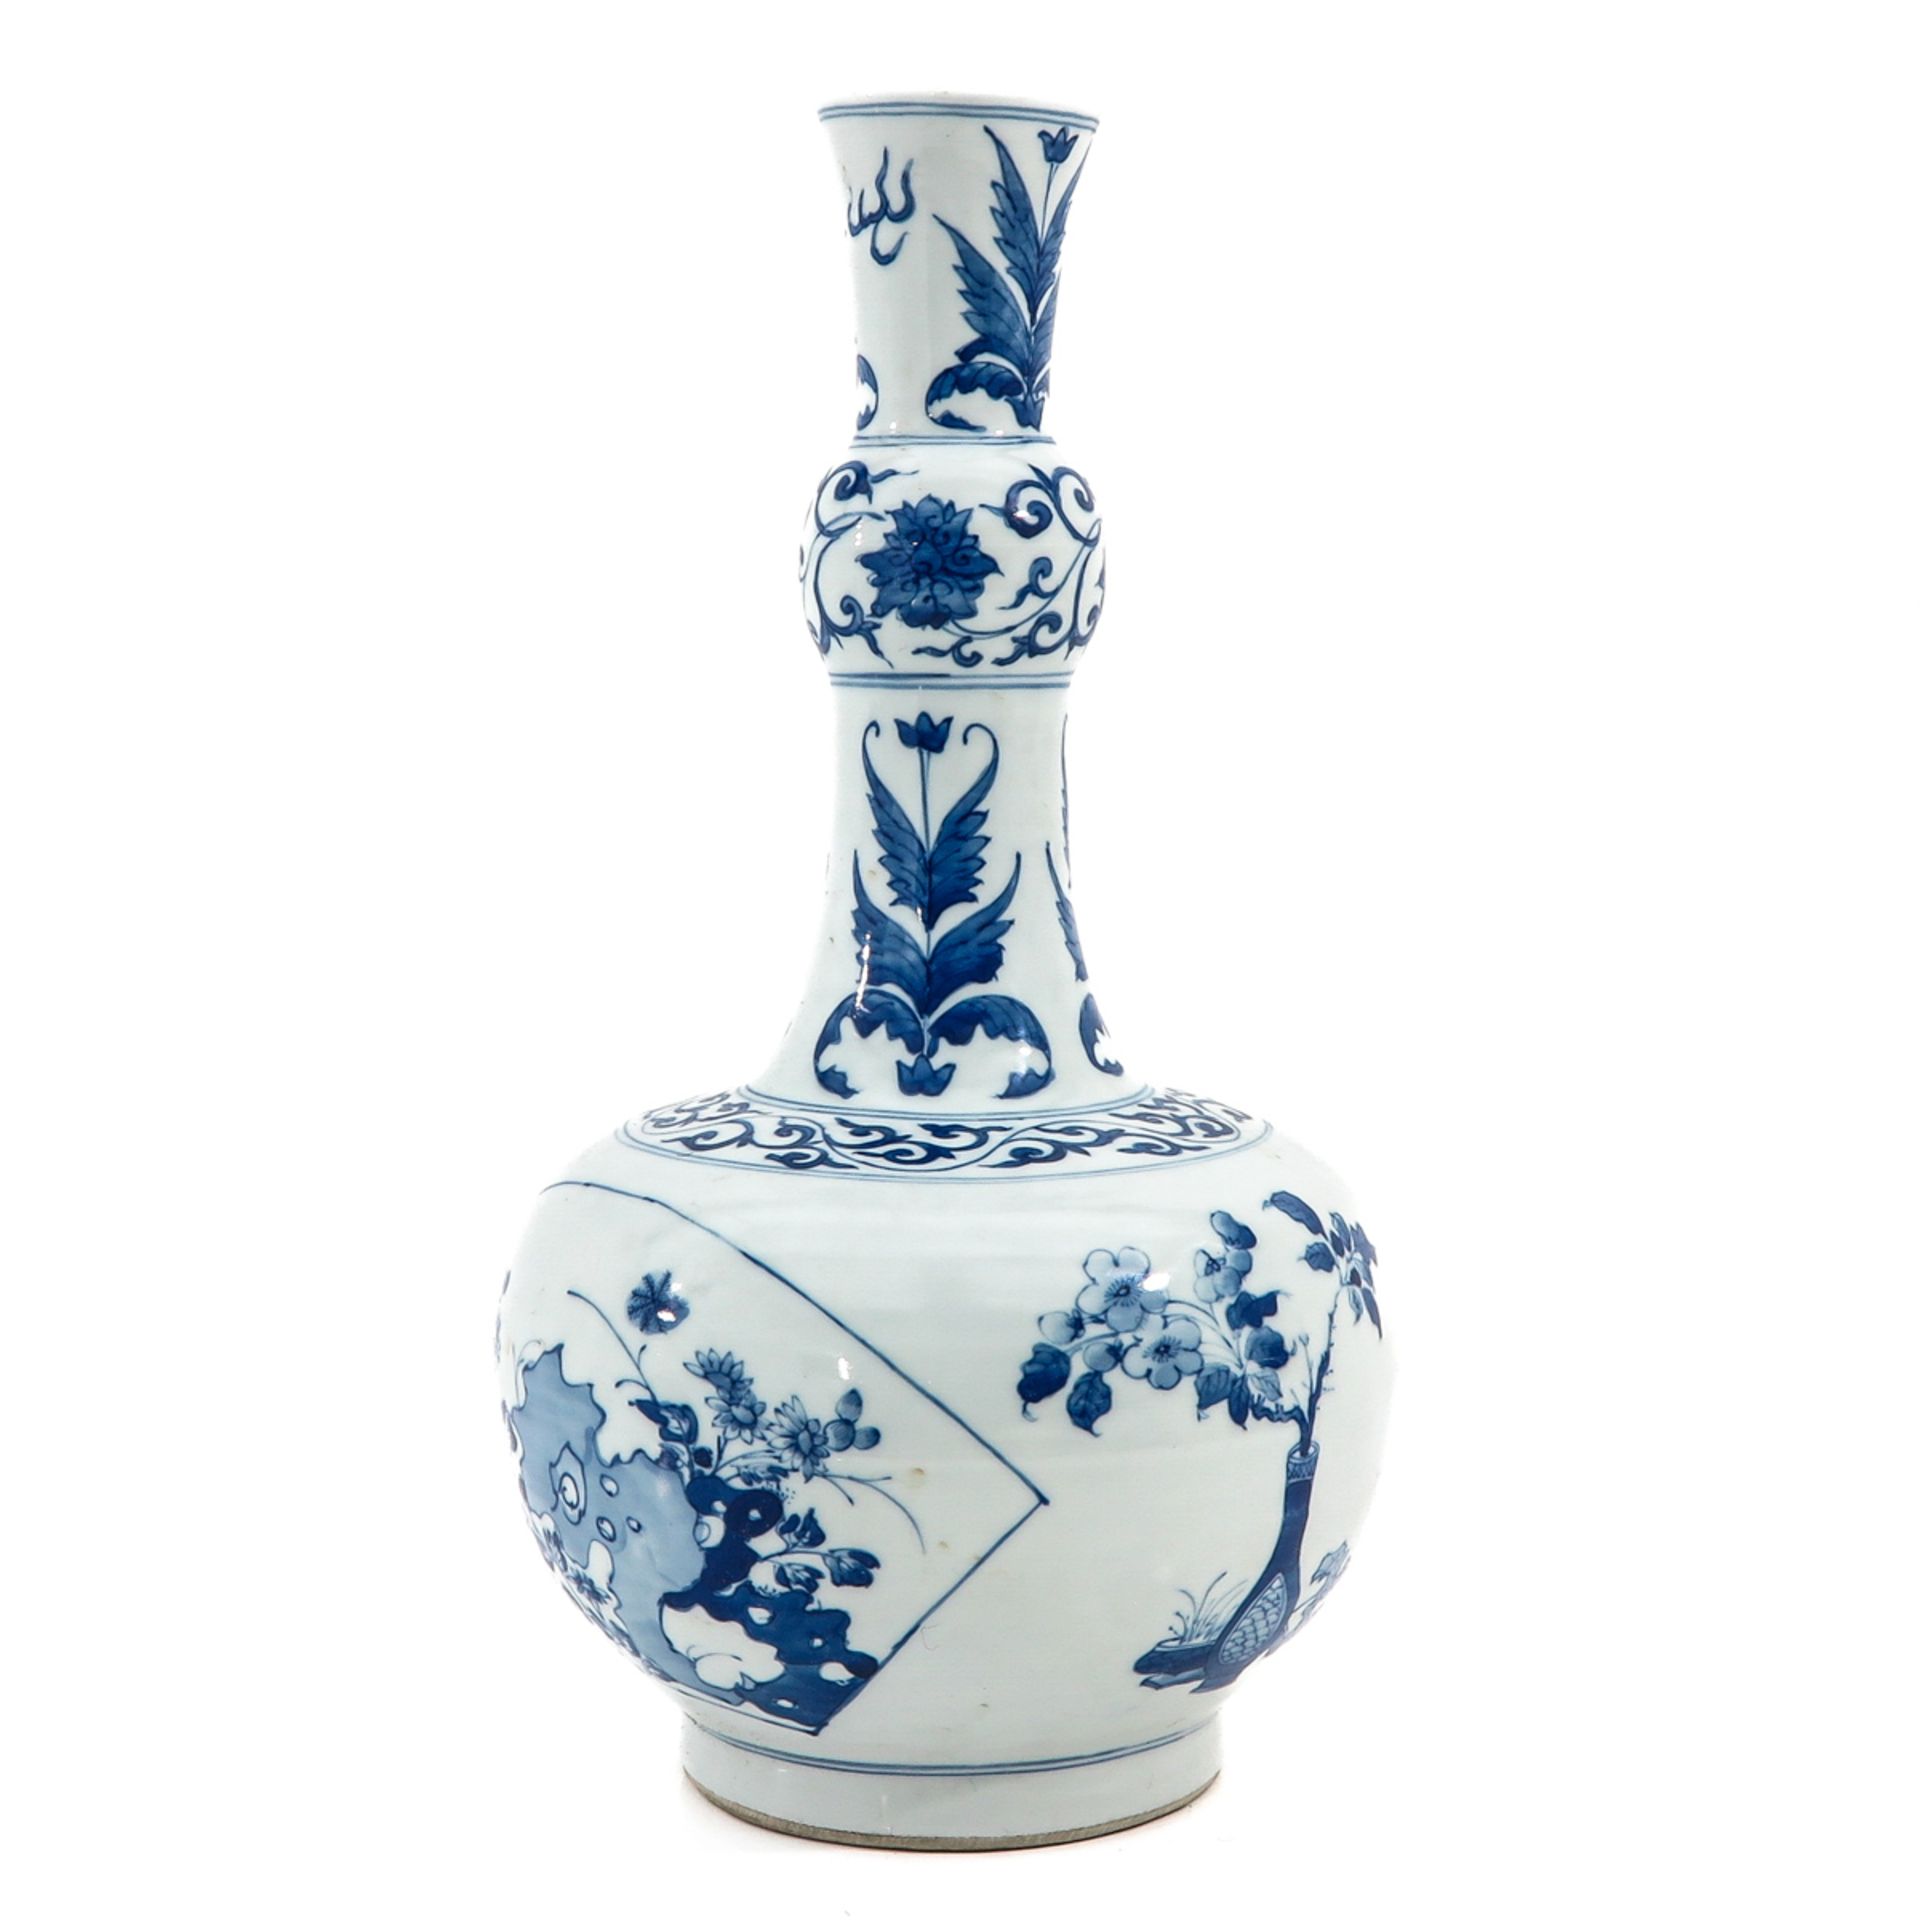 A Blue and White Gourd Vase - Image 2 of 9